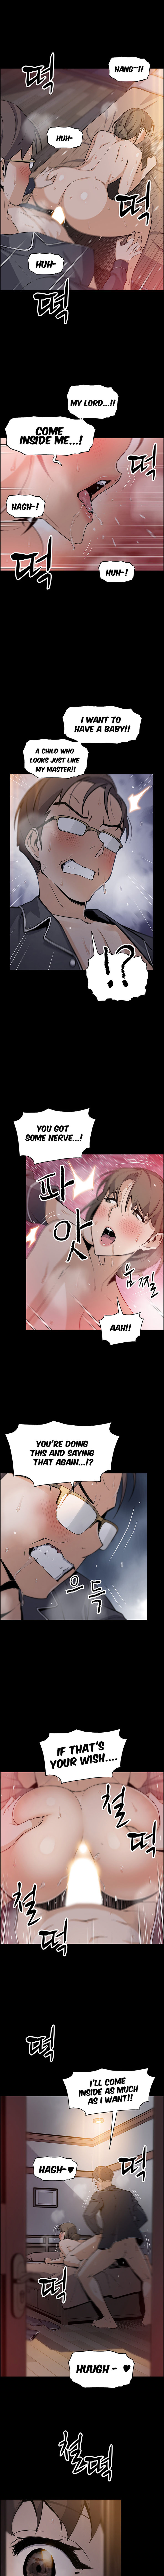 Housekeeper Manhwa - Chapter 43 Page 3